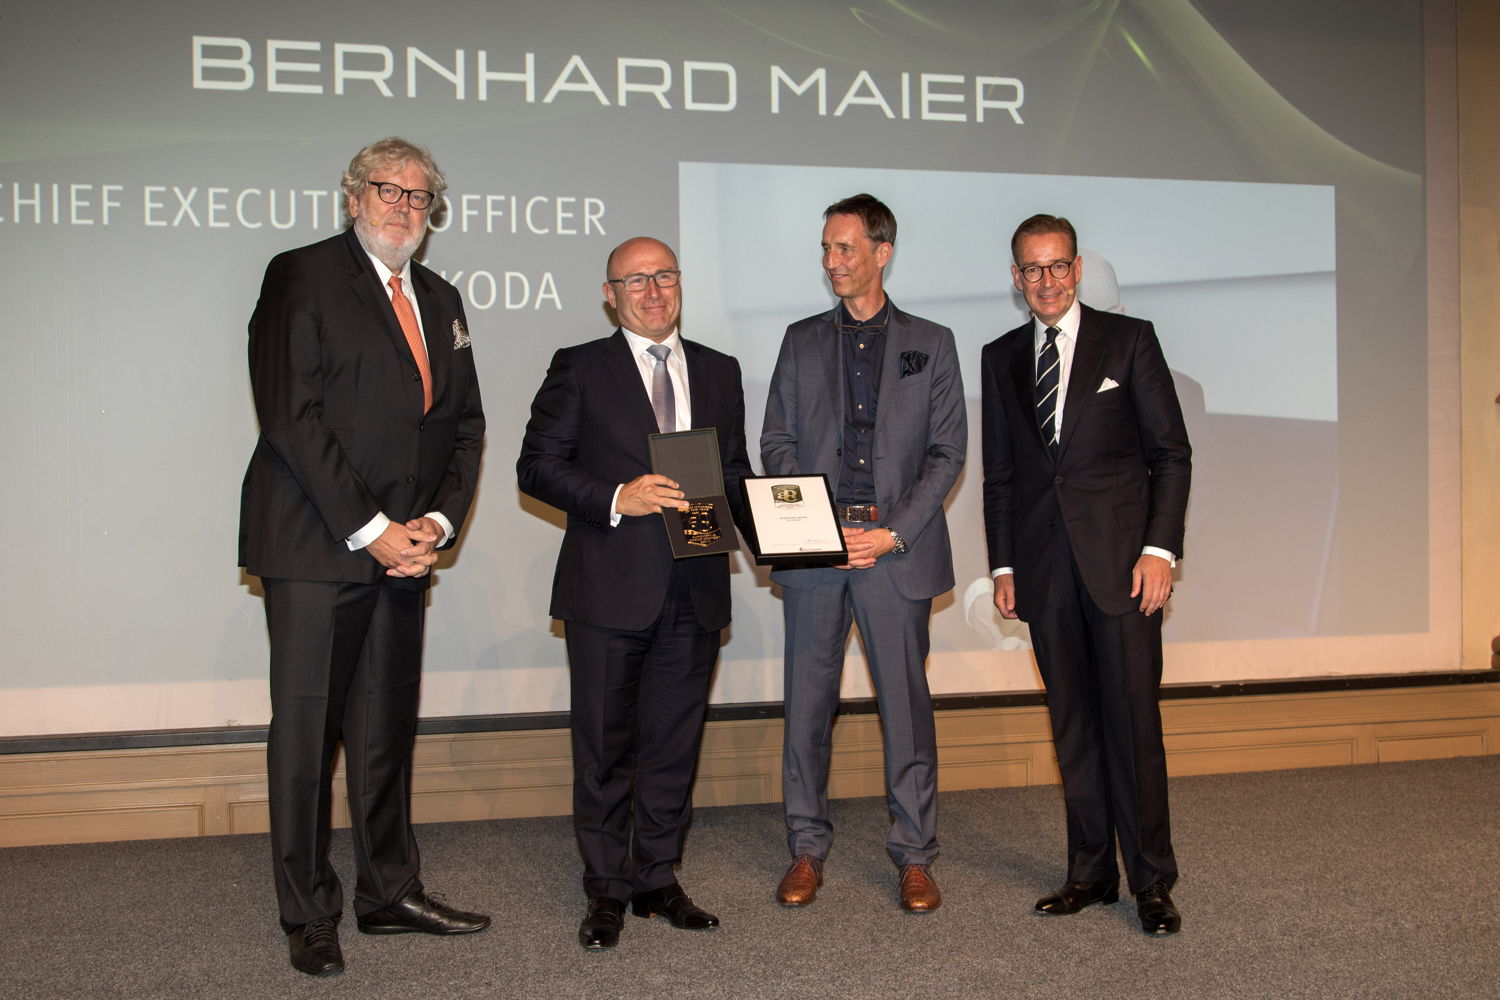 Head of German Design Council, Dr. Michael Peters (on the right) and Head of Design Brands and Operations at Mercedes-Benz, Kai Sieber (in the middle), handed over the award to ŠKODA Chairman of the board of Management Bernhard Maier. The panel recognises his outstanding achievements for brand and design.